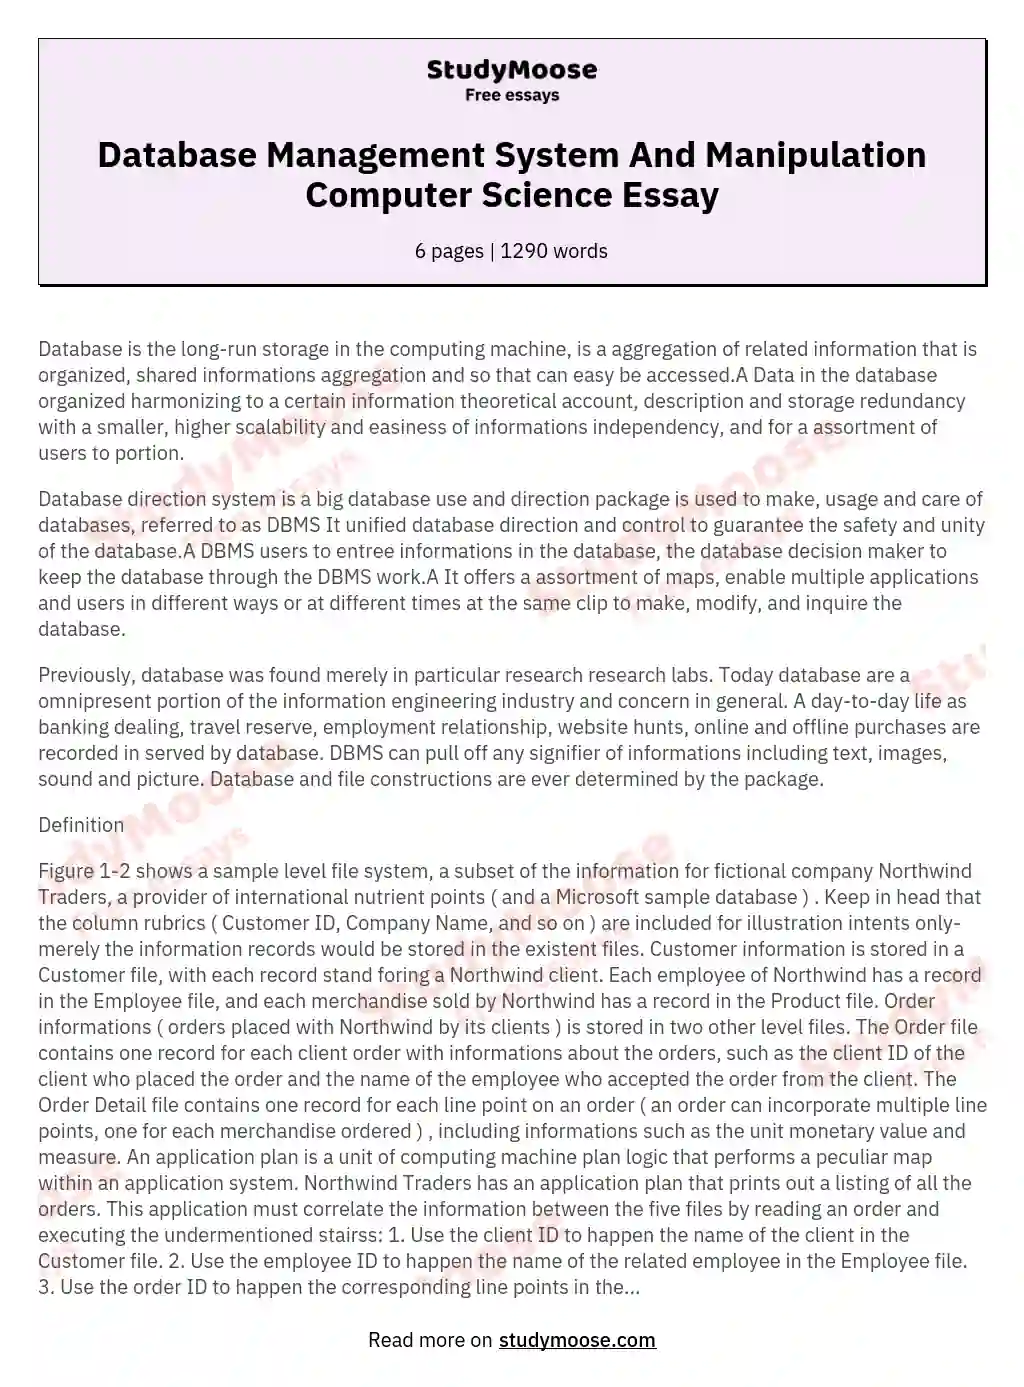 Database Management System And Manipulation Computer Science Essay essay